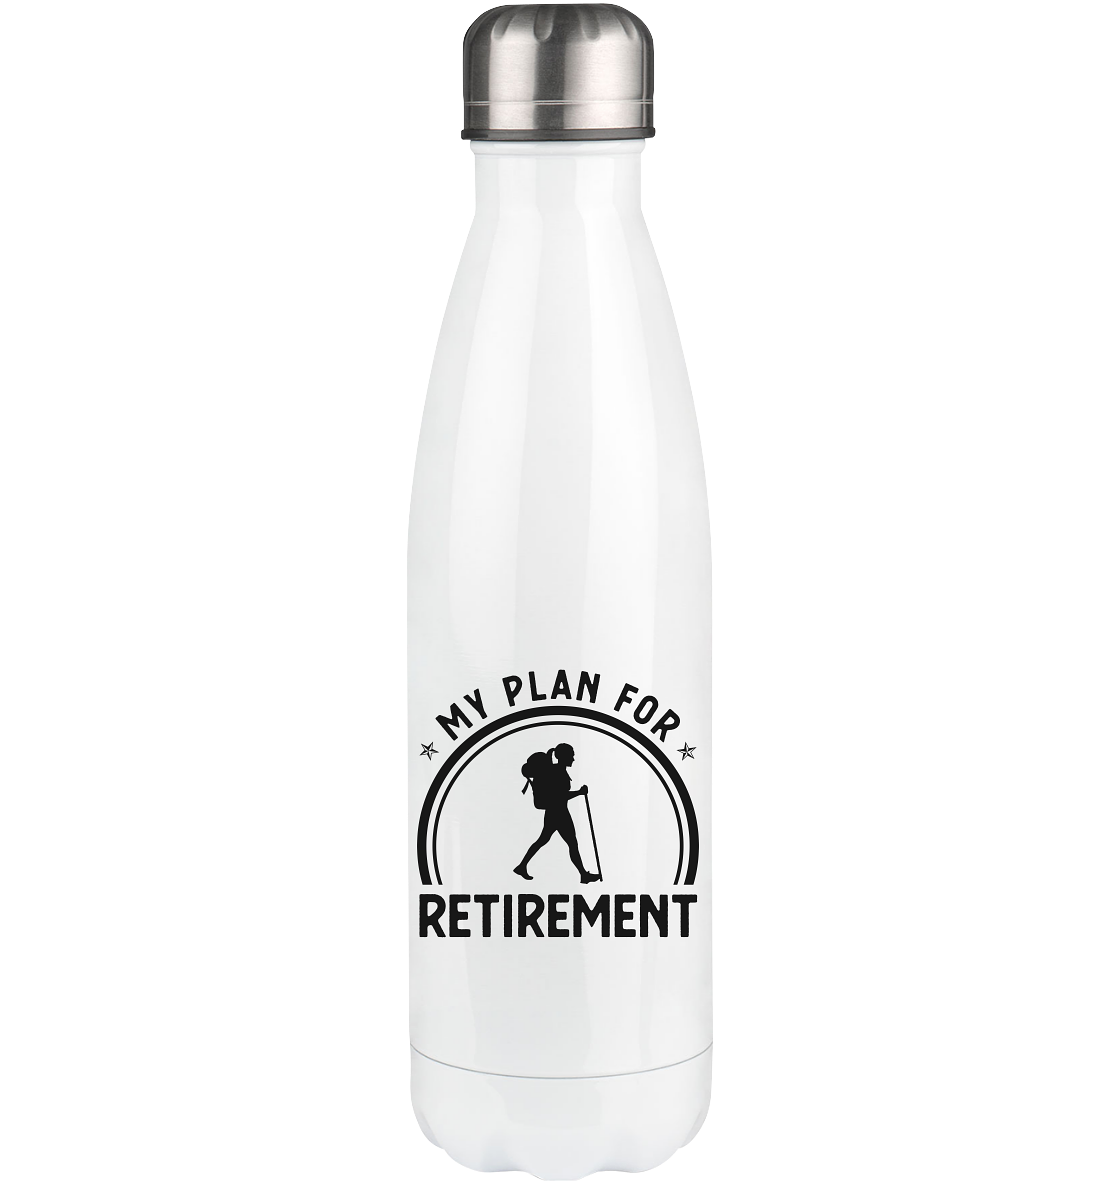 My Plan For Retirement 1 - Edelstahl Thermosflasche wandern 500ml